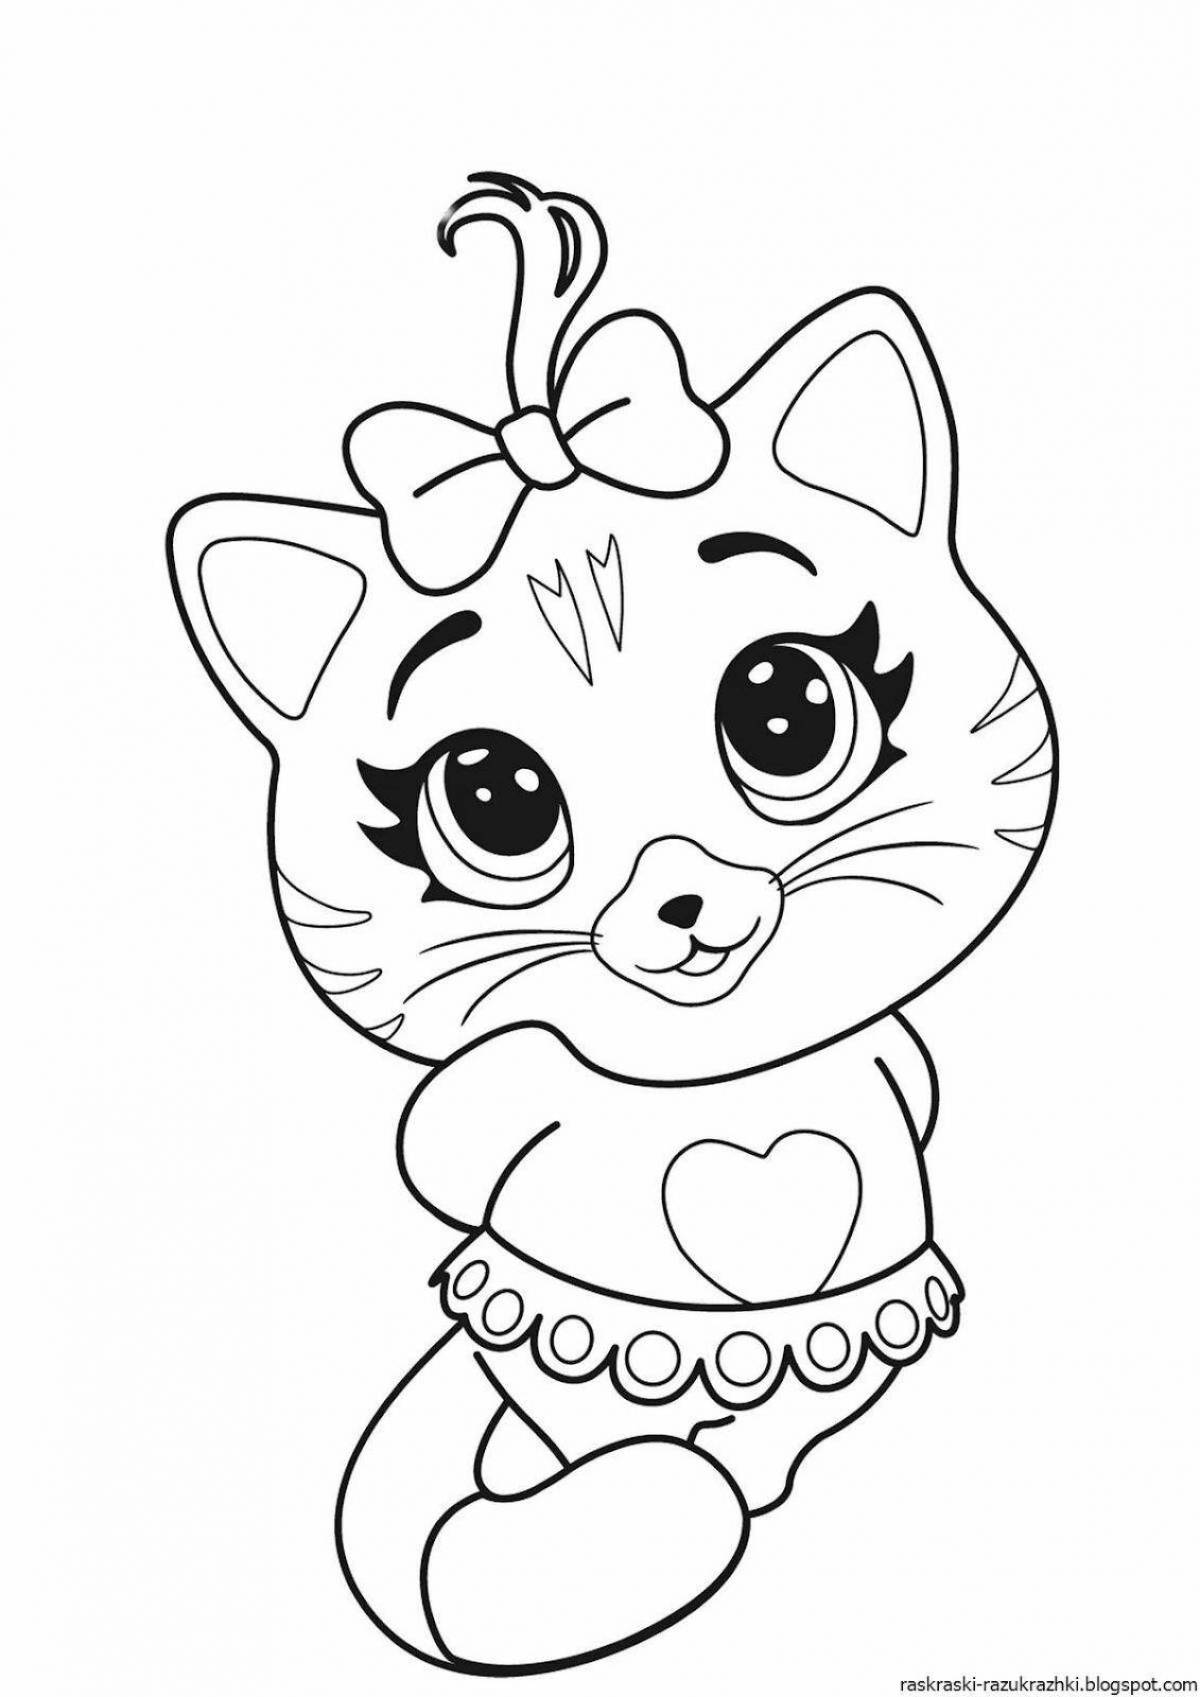 Adorable cat coloring pages for girls